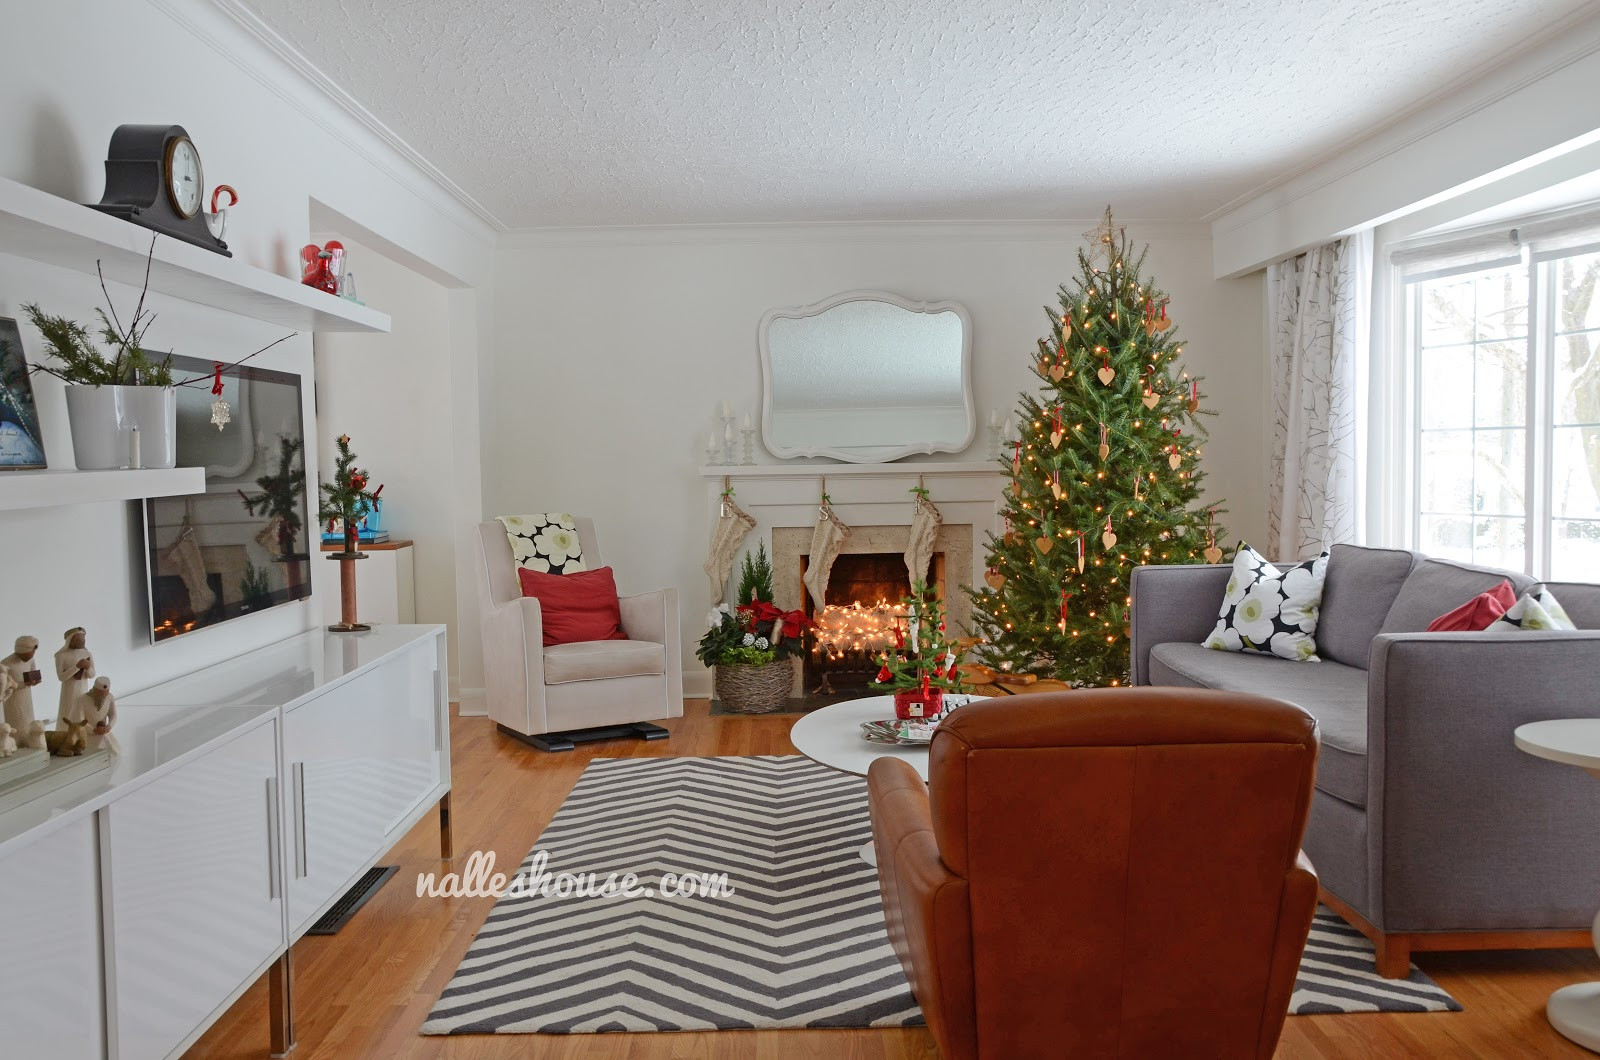 L Shaped Living Room Ideas
 Nalle s House Christmas House Tour Dining and Living Room